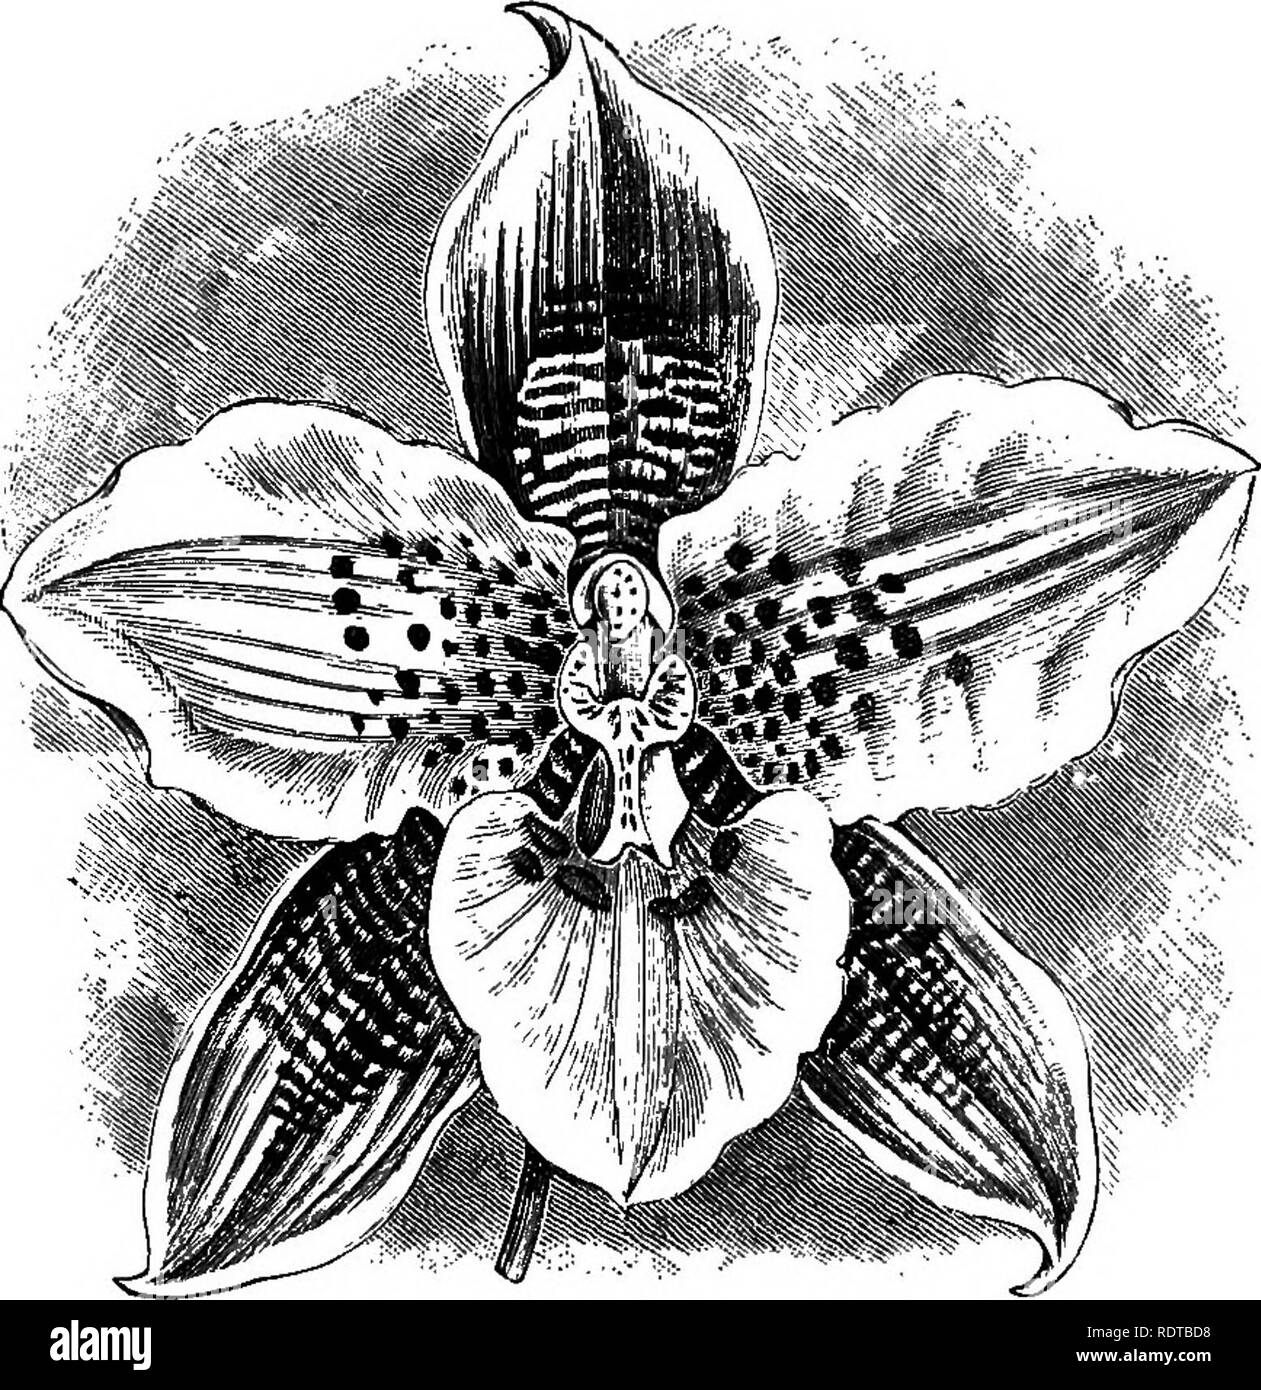 . The orchid-grower's manual, containing descriptions of the best species and varieties of orchidaceous plants in cultivation ... Orchids. 594 oechid-geower's manual. blossoms during the autumn months, and continues flowering for a long time.â Guatemala. Fig.â Warner, 8el. OrcJi. PL, iii. t. 17; Batem.. Mon. Odont., t. 2; Lindenia, iii. t. 122 ; Veitch's Man. Orck. PL, i. p. 69 ; Orchid Albwm, ix. t. 417. O. URO-SKINNERI ALBUM, Qower.âA lovely variety with a pure white lip, was exhibited by Major-General E. S. Berkeley before the Eoyal Horticultural Society on October 10th, 1893, when it recei Stock Photo